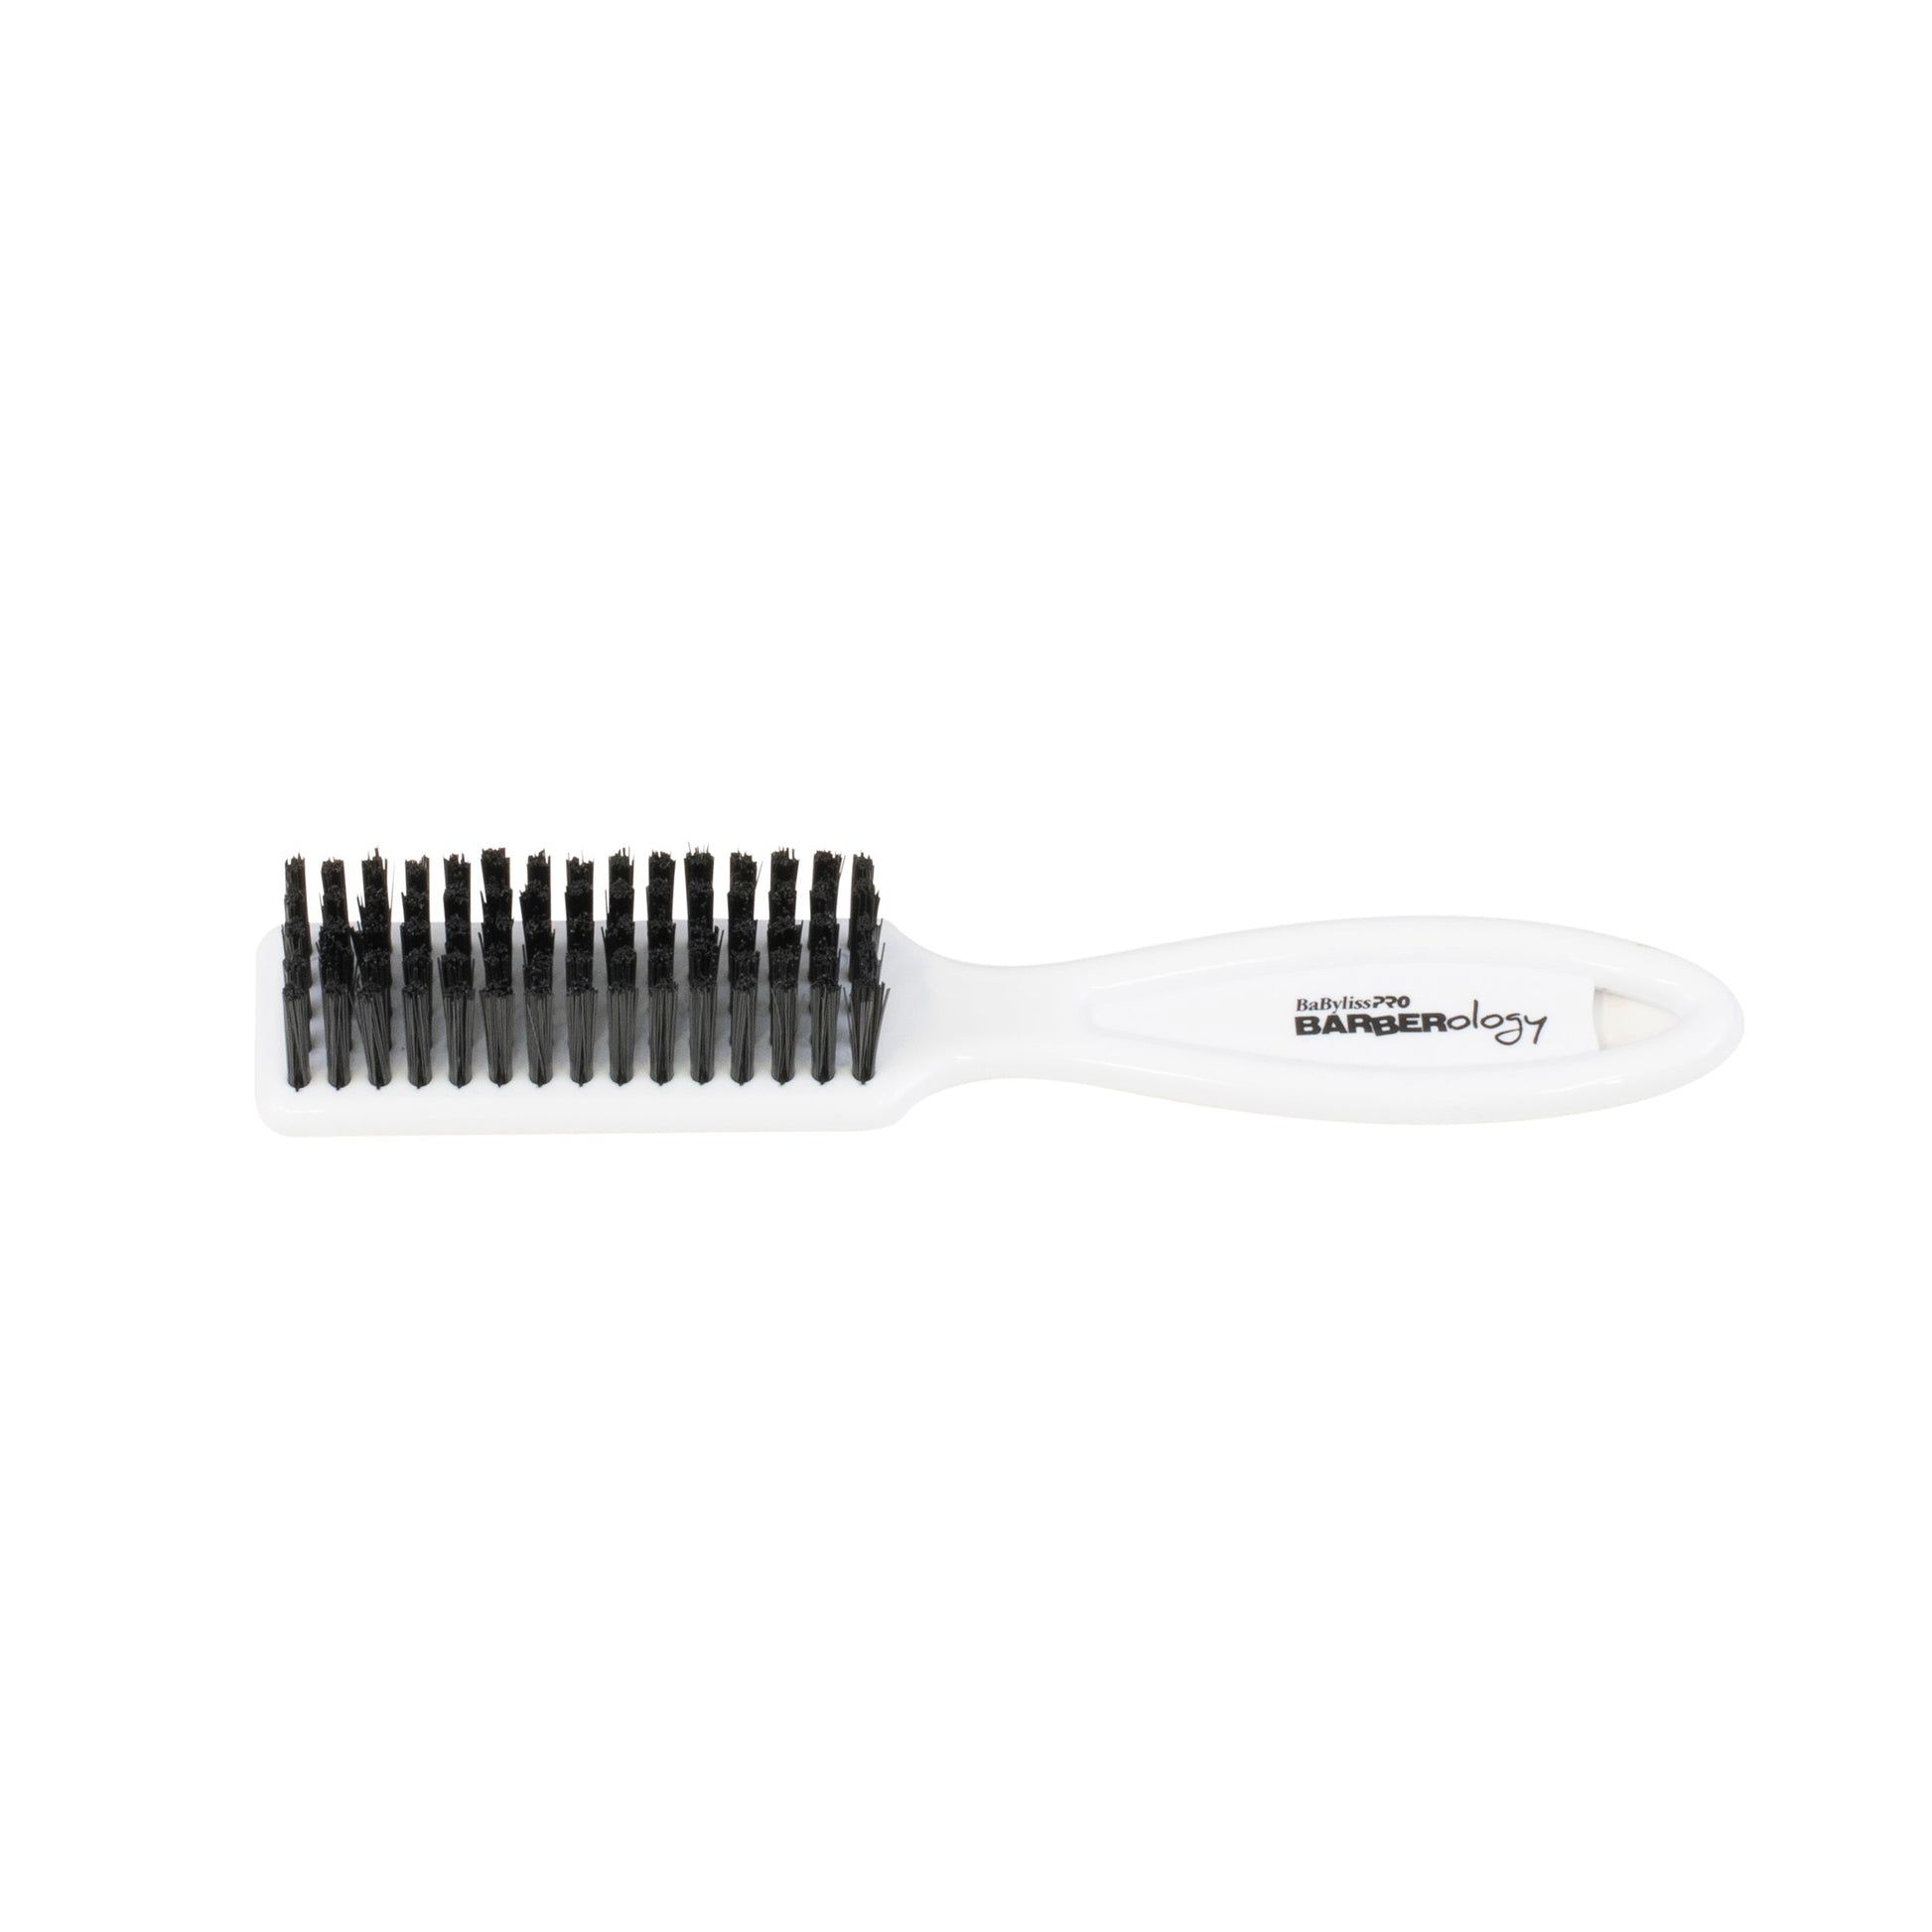 Babylisspro Barberology Fades And Blades Cleaning Brush White